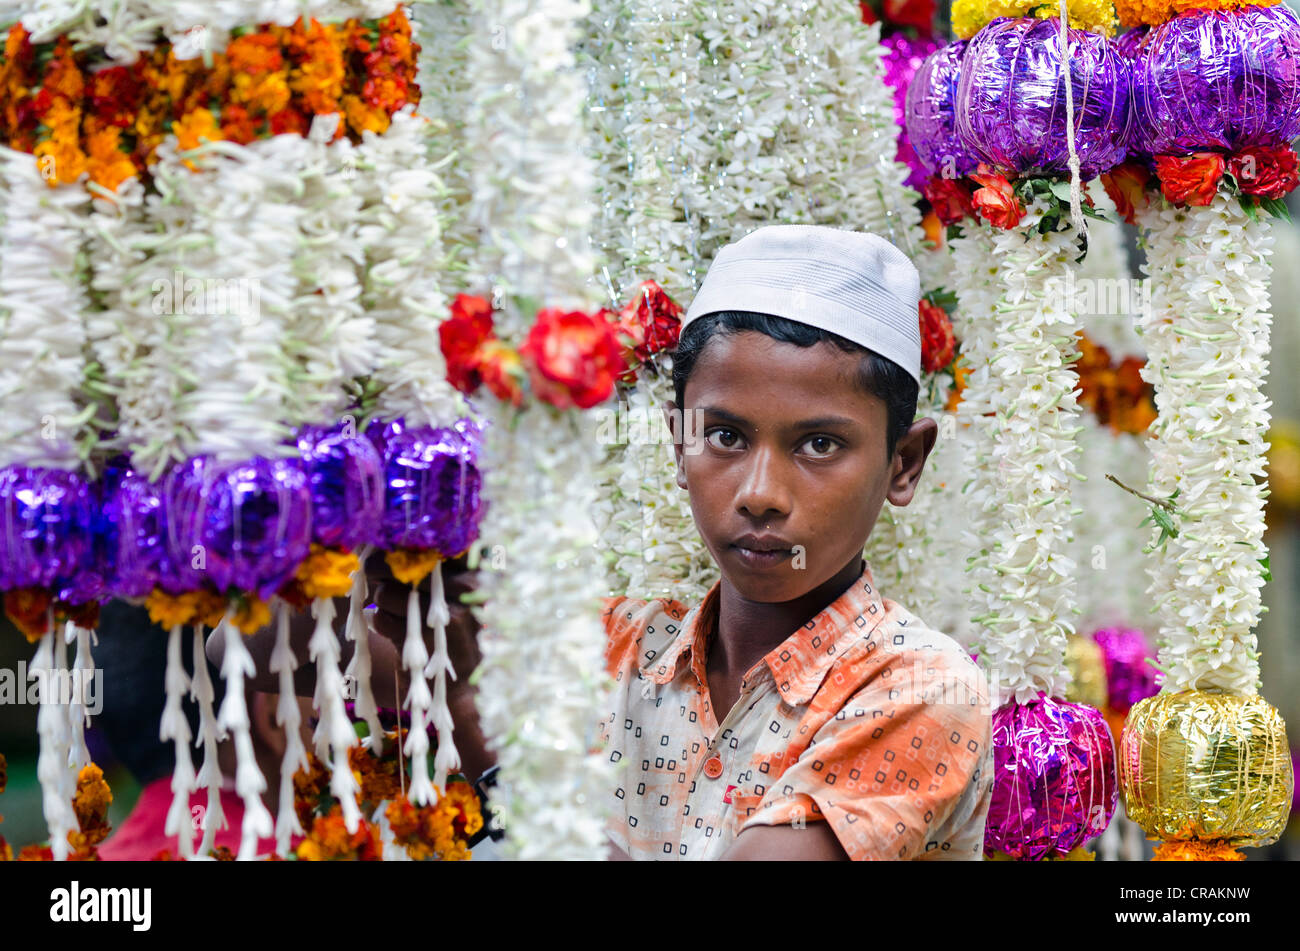 Muslim flower seller, leis or floral garlands, market, Mysore, South India, India, Asia Stock Photo